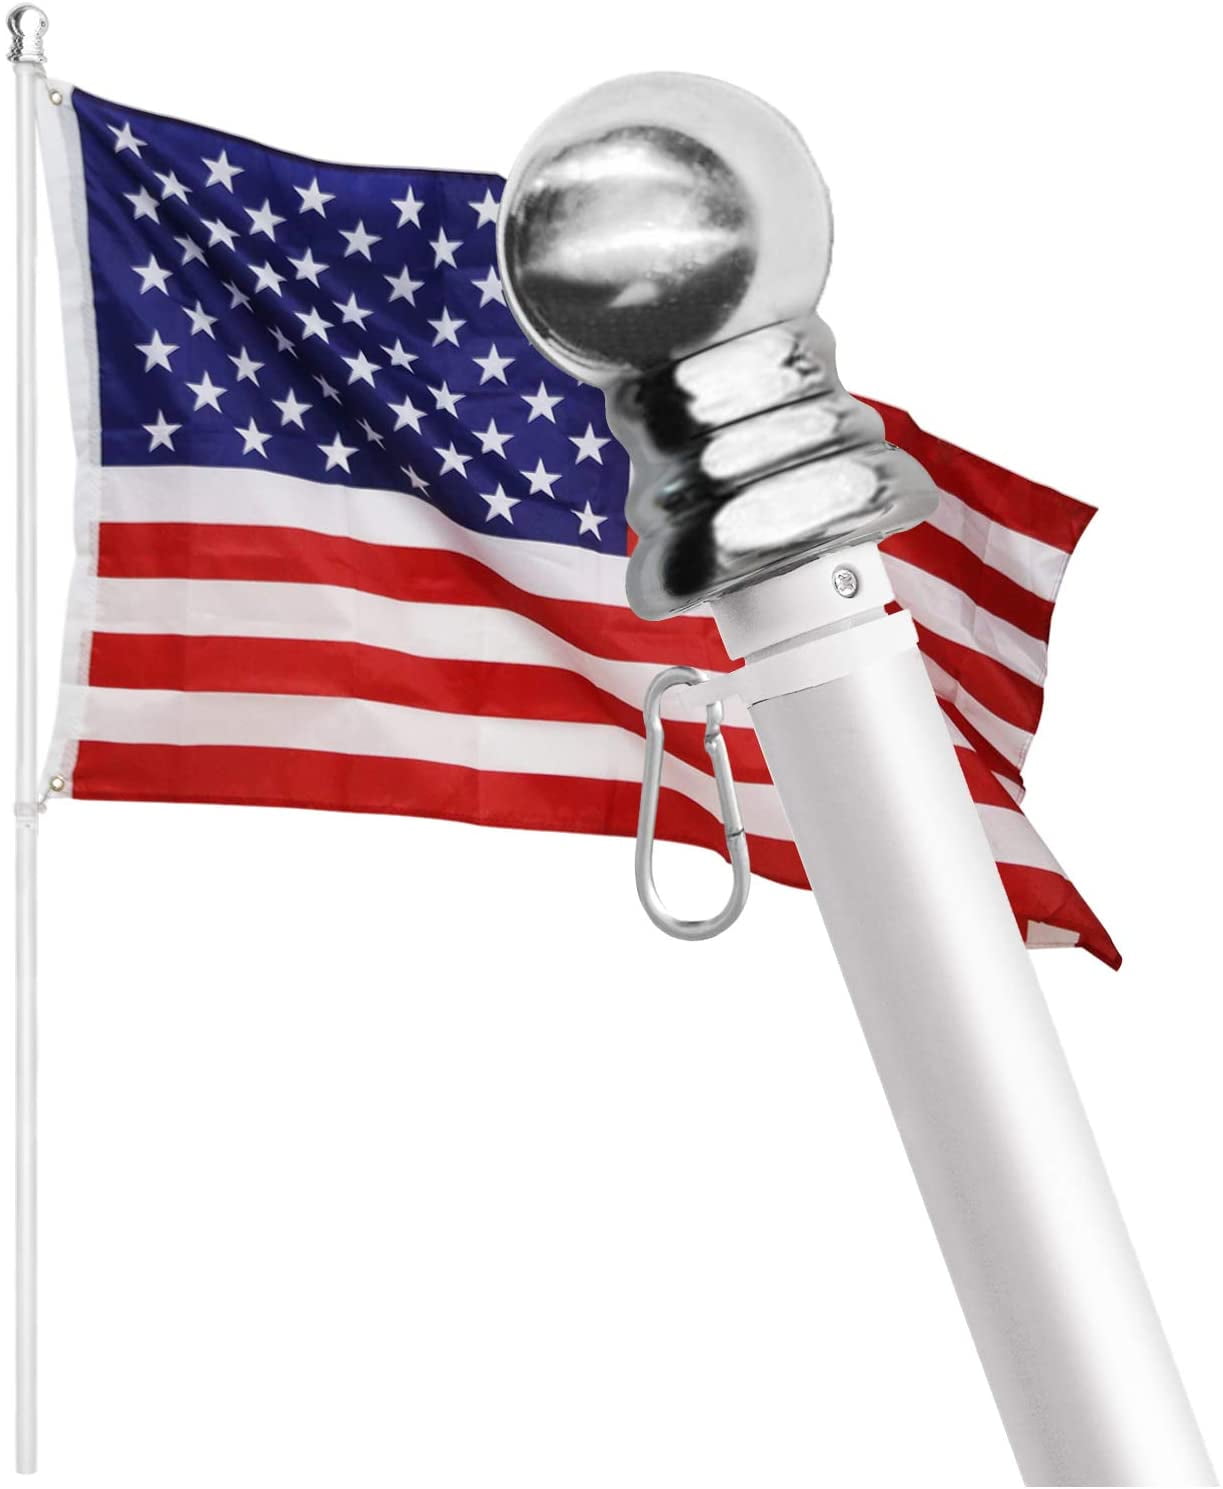 Flag Pole Bracket and American Flag Brushed Aluminum Flag Pole. Great for Residential or Commercial American Classic White Kit Flag Pole Kit: Includes Tangle Free Flag Pole Made in USA 